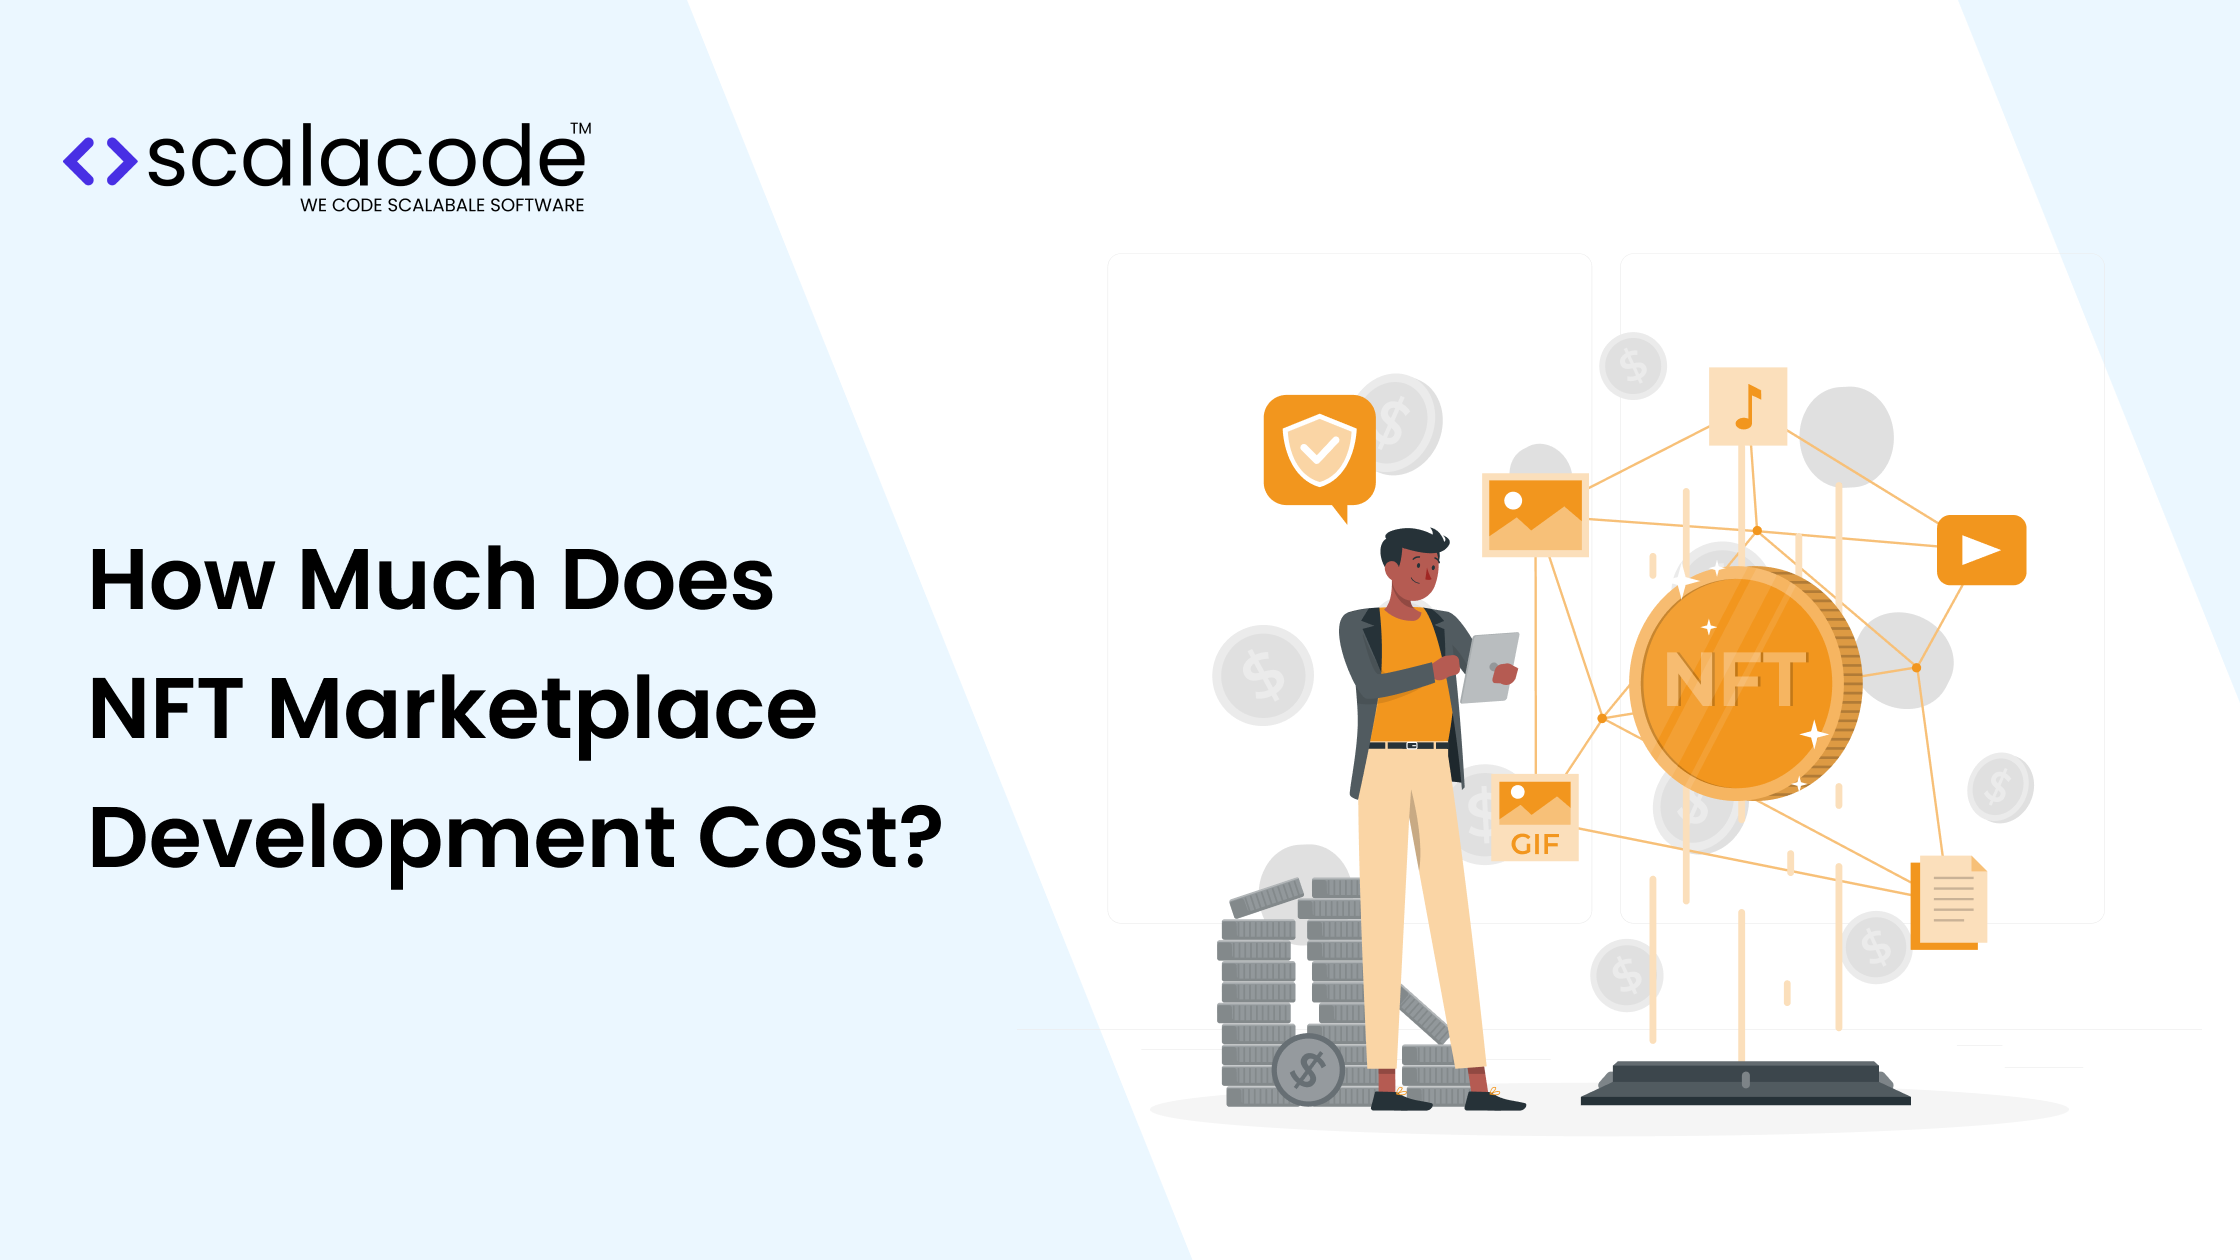 How Much Does NFT Marketplace Development Cost?